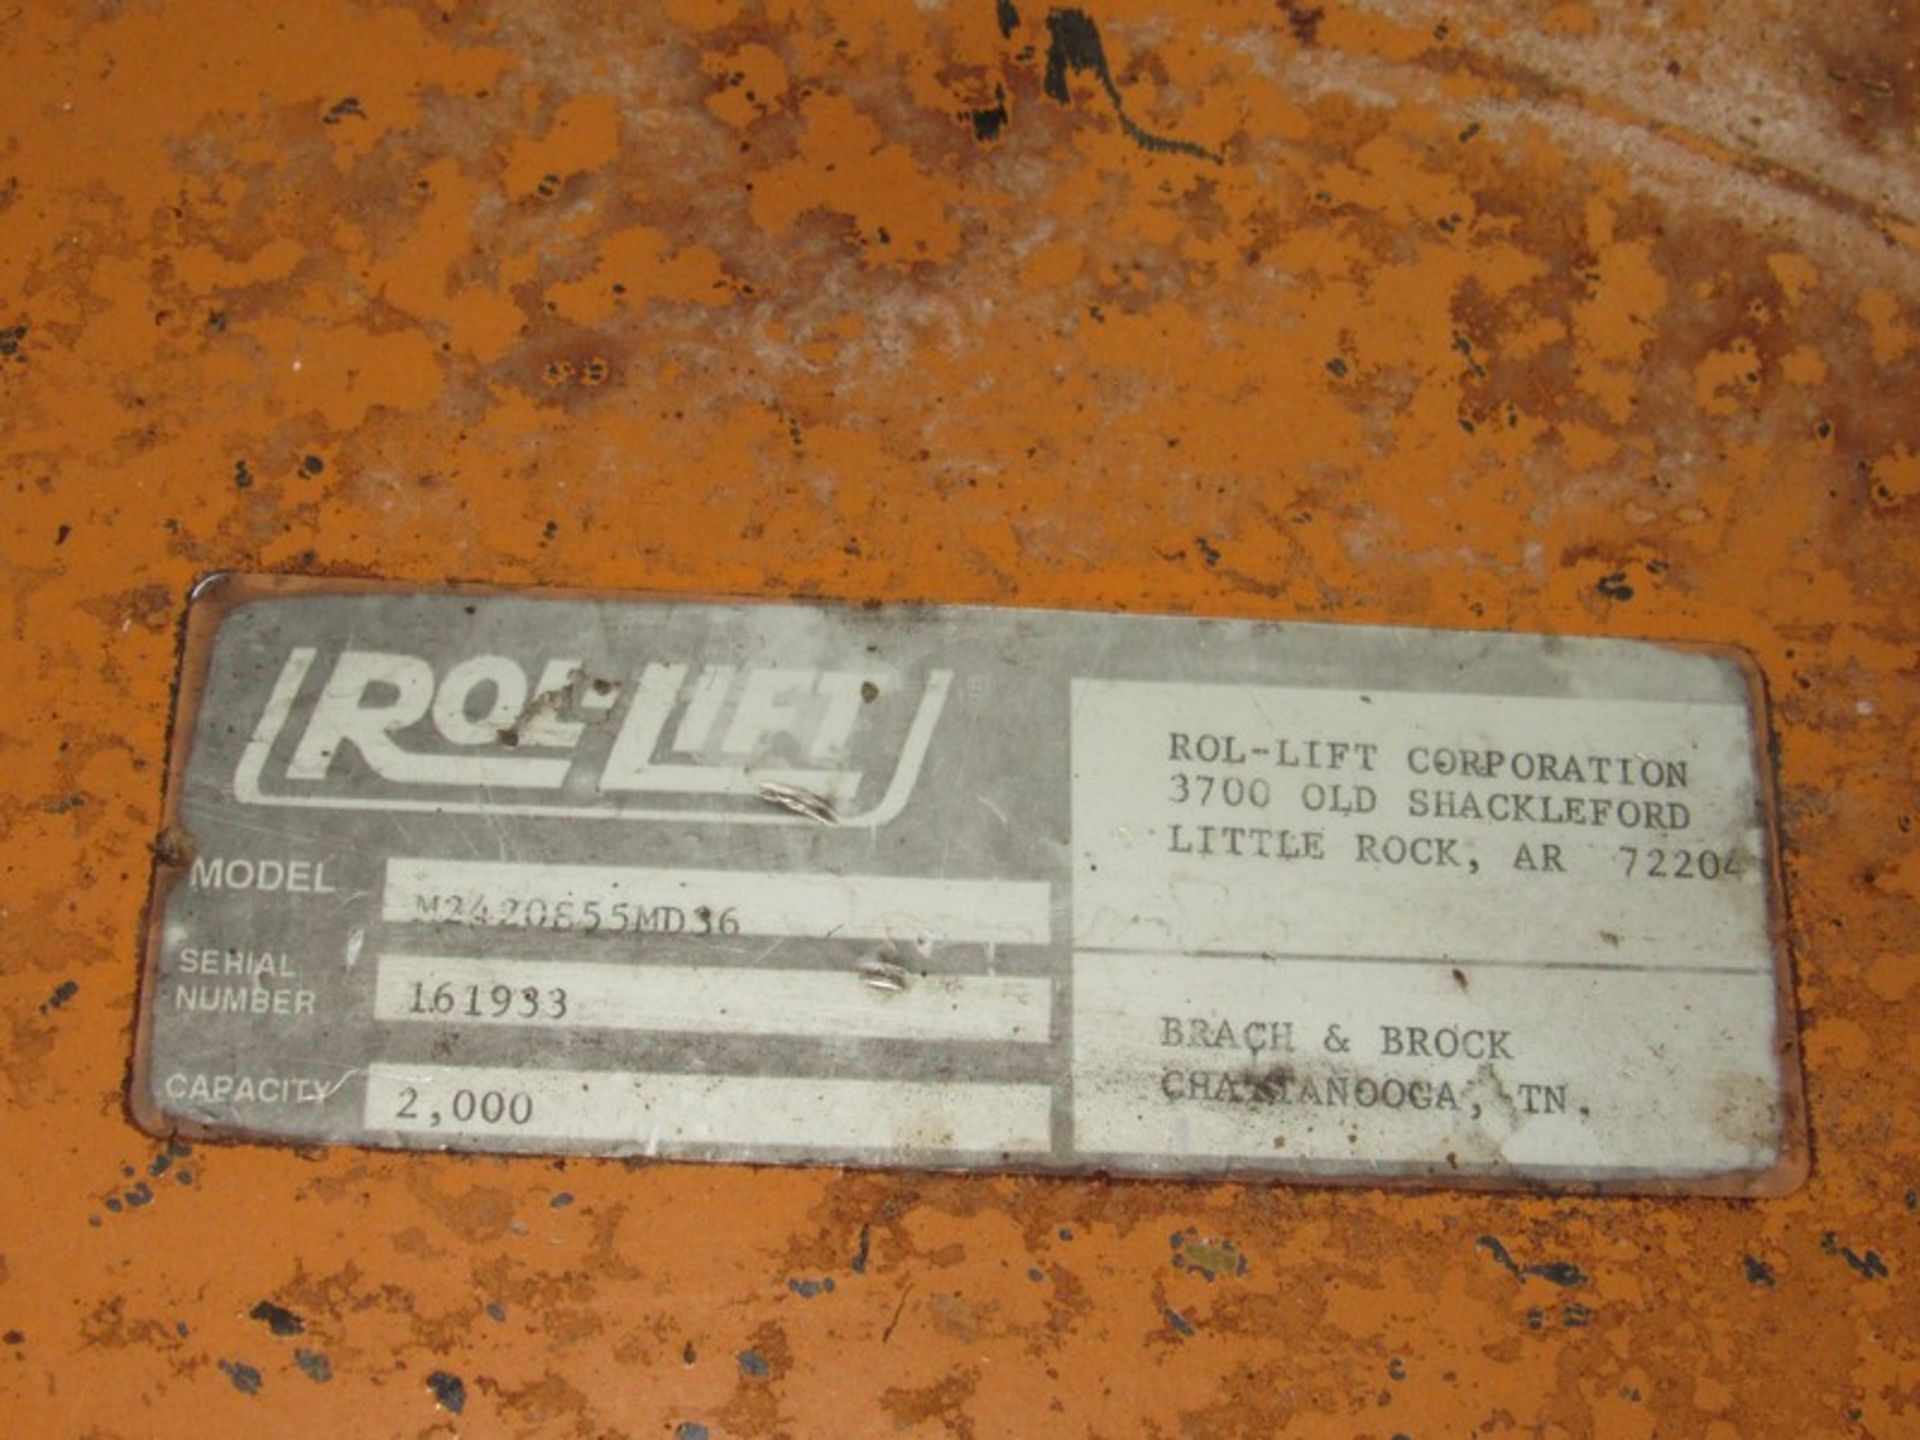 Rol-Lift Floor Lift 2000 Pound Capacity, Battery Operated Hydraulic Lift, Model #M2420855MD36, - Image 2 of 3